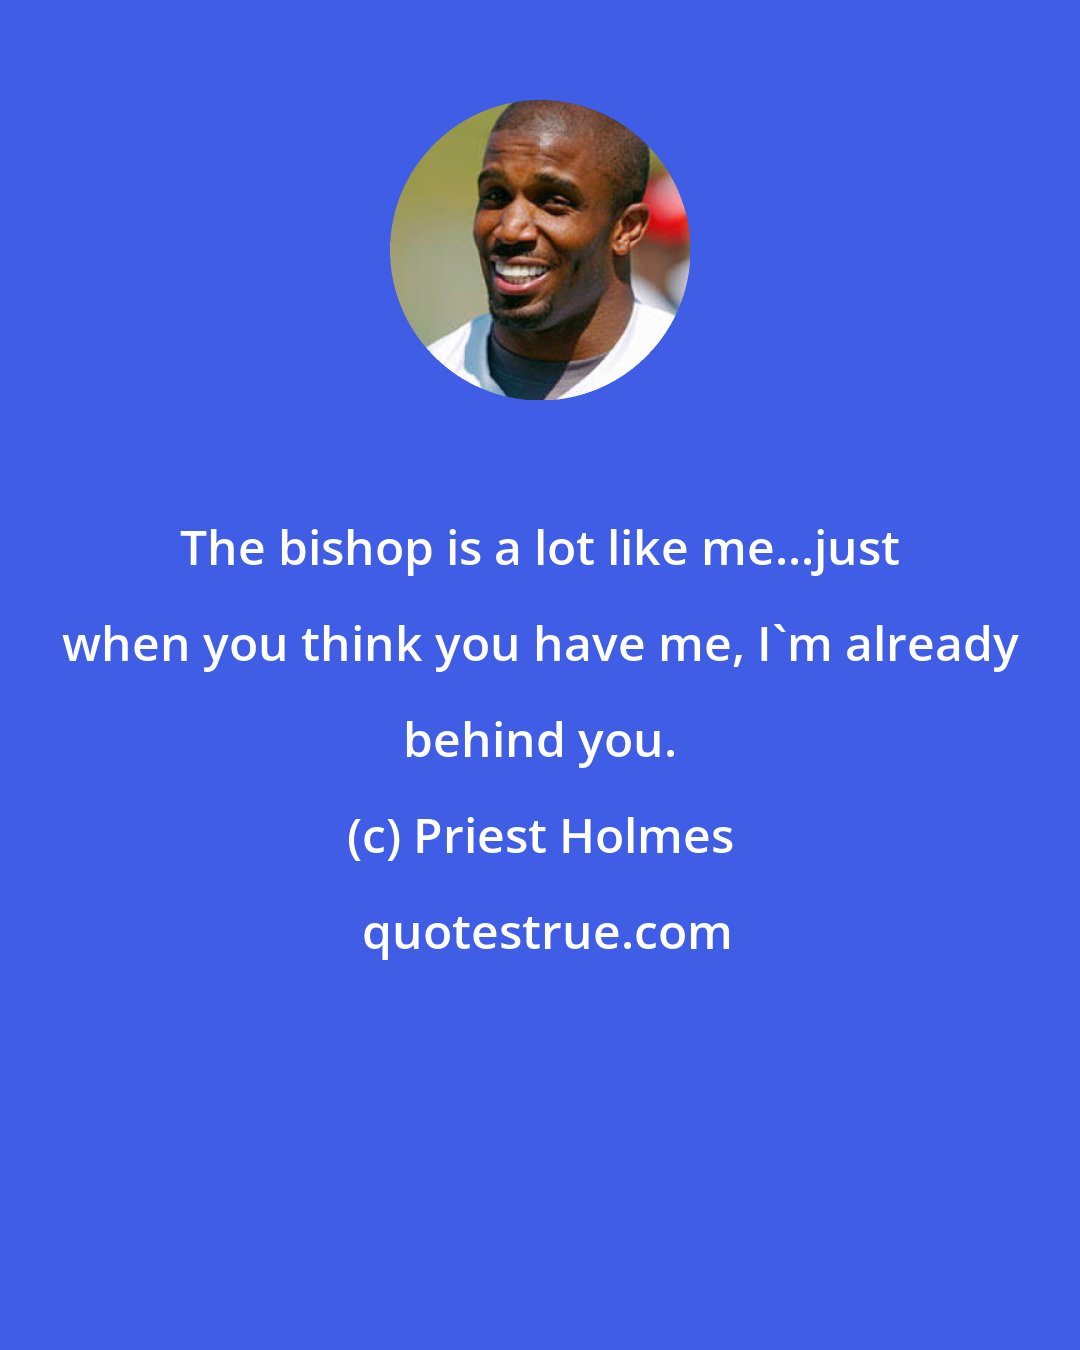 Priest Holmes: The bishop is a lot like me...just when you think you have me, I'm already behind you.